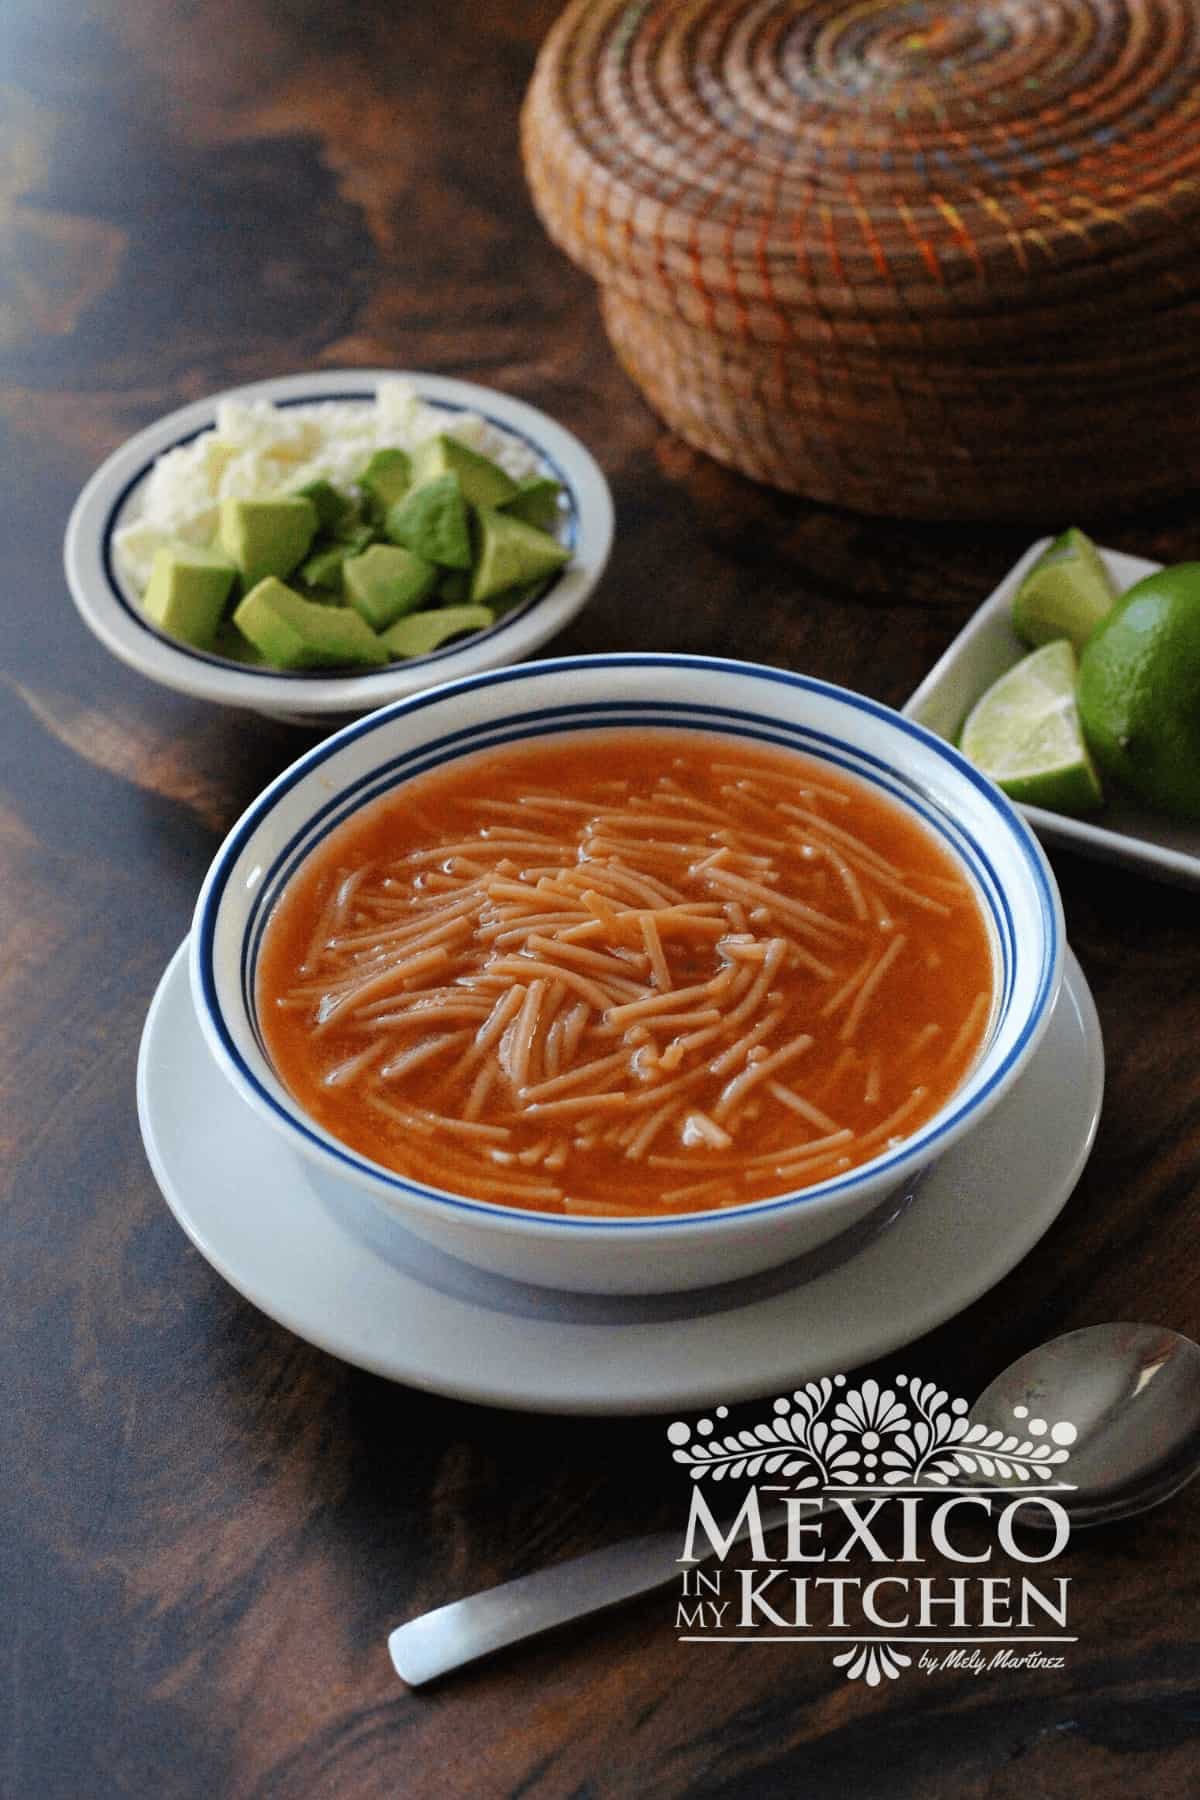 Sopa de fideo served in a bowl, next to limes and avocado.